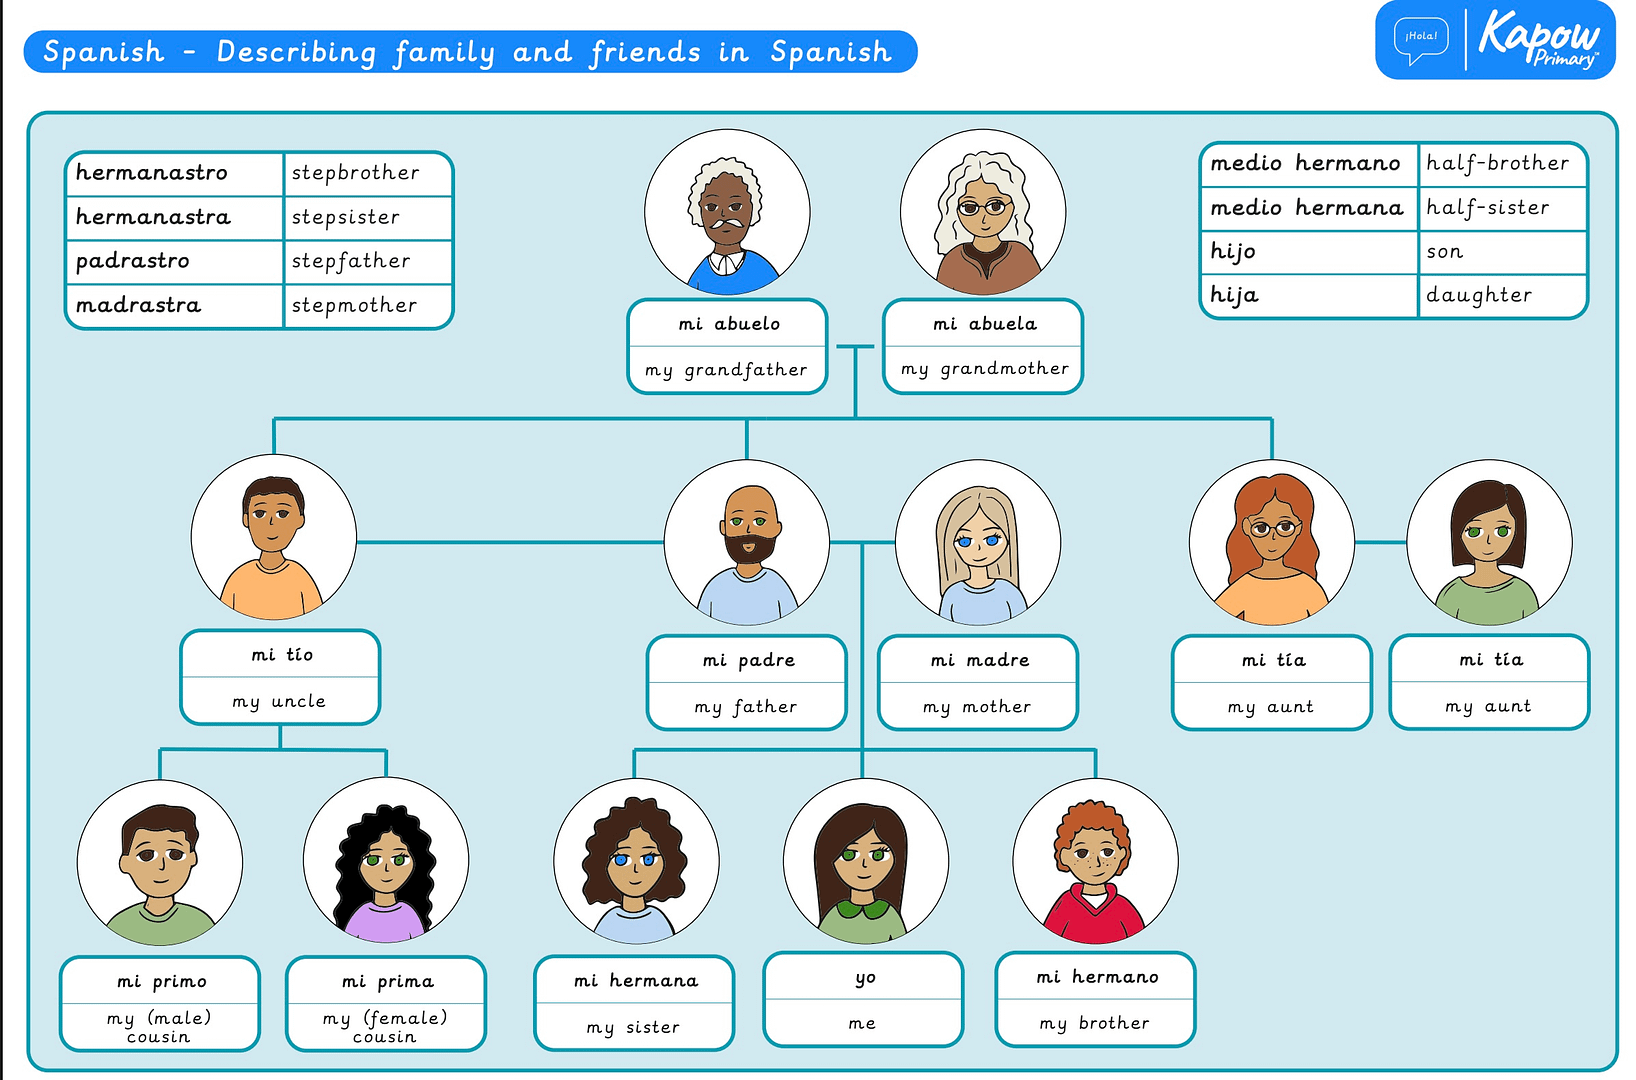 Knowledge organiser: Spanish – Describing family and friends